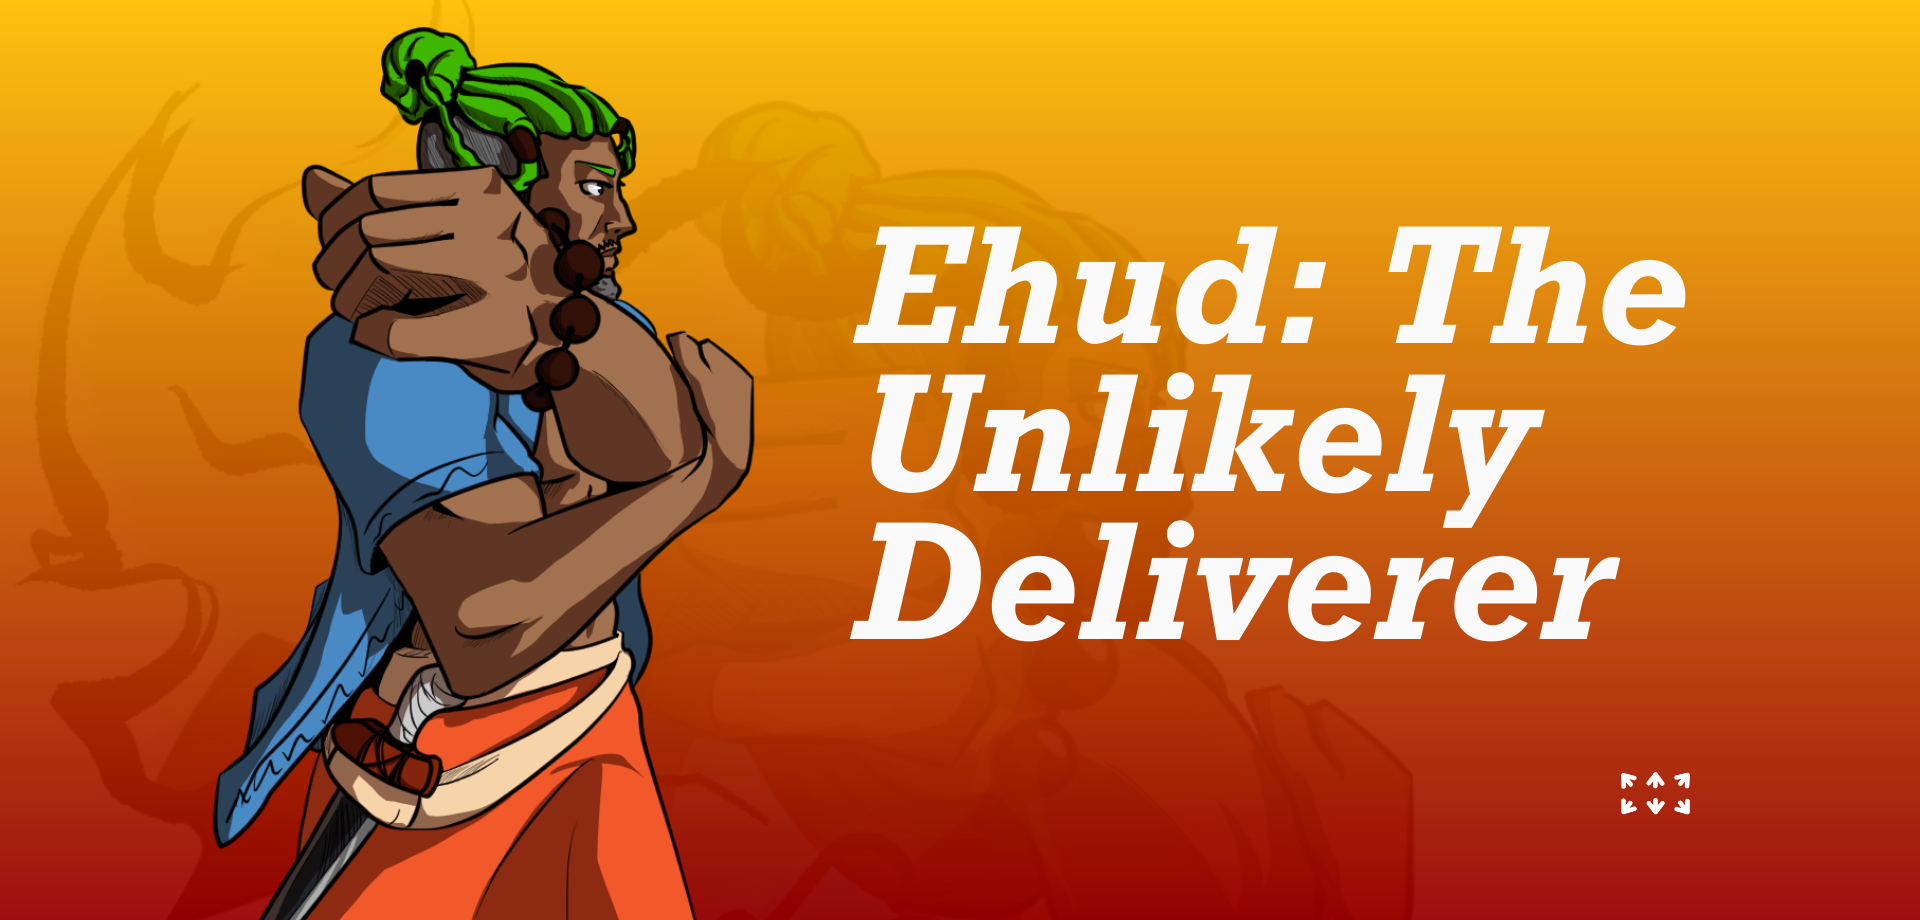 7 Ways Ehud Was an Unlikely Deliverer in the Land of Isreal